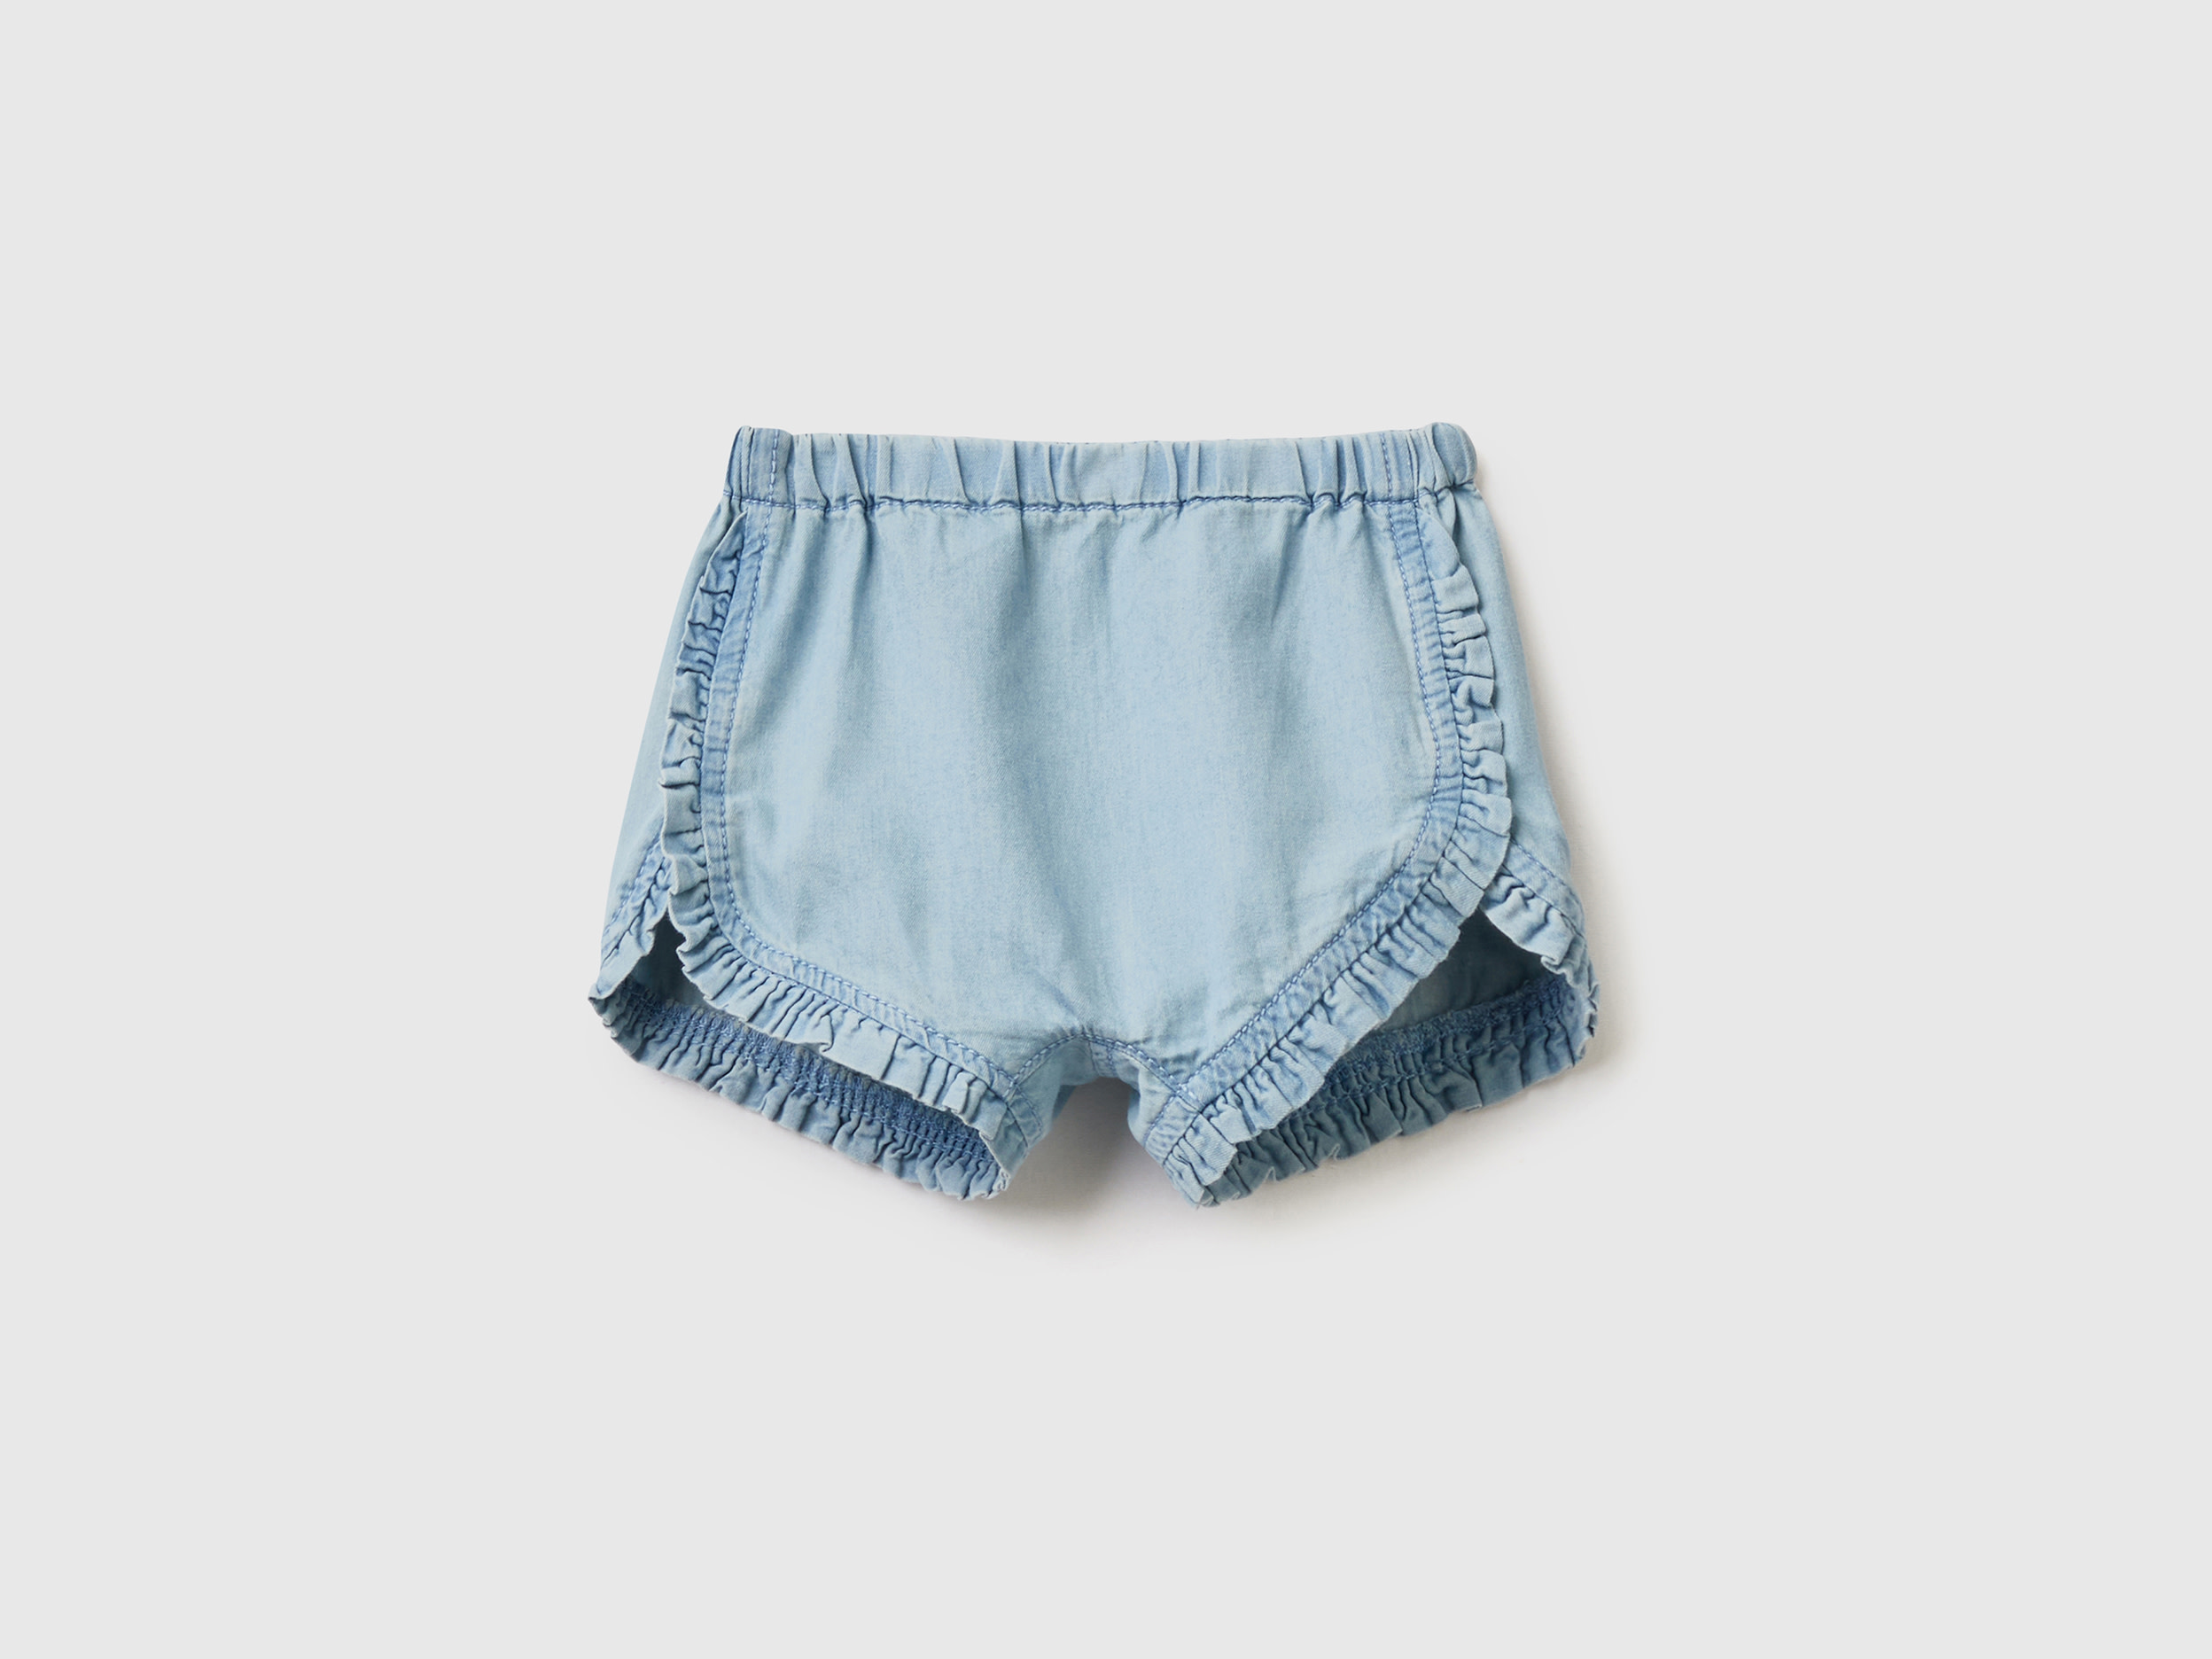 Benetton, Shorts With Rouches, size 9-12, Sky Blue, Kids